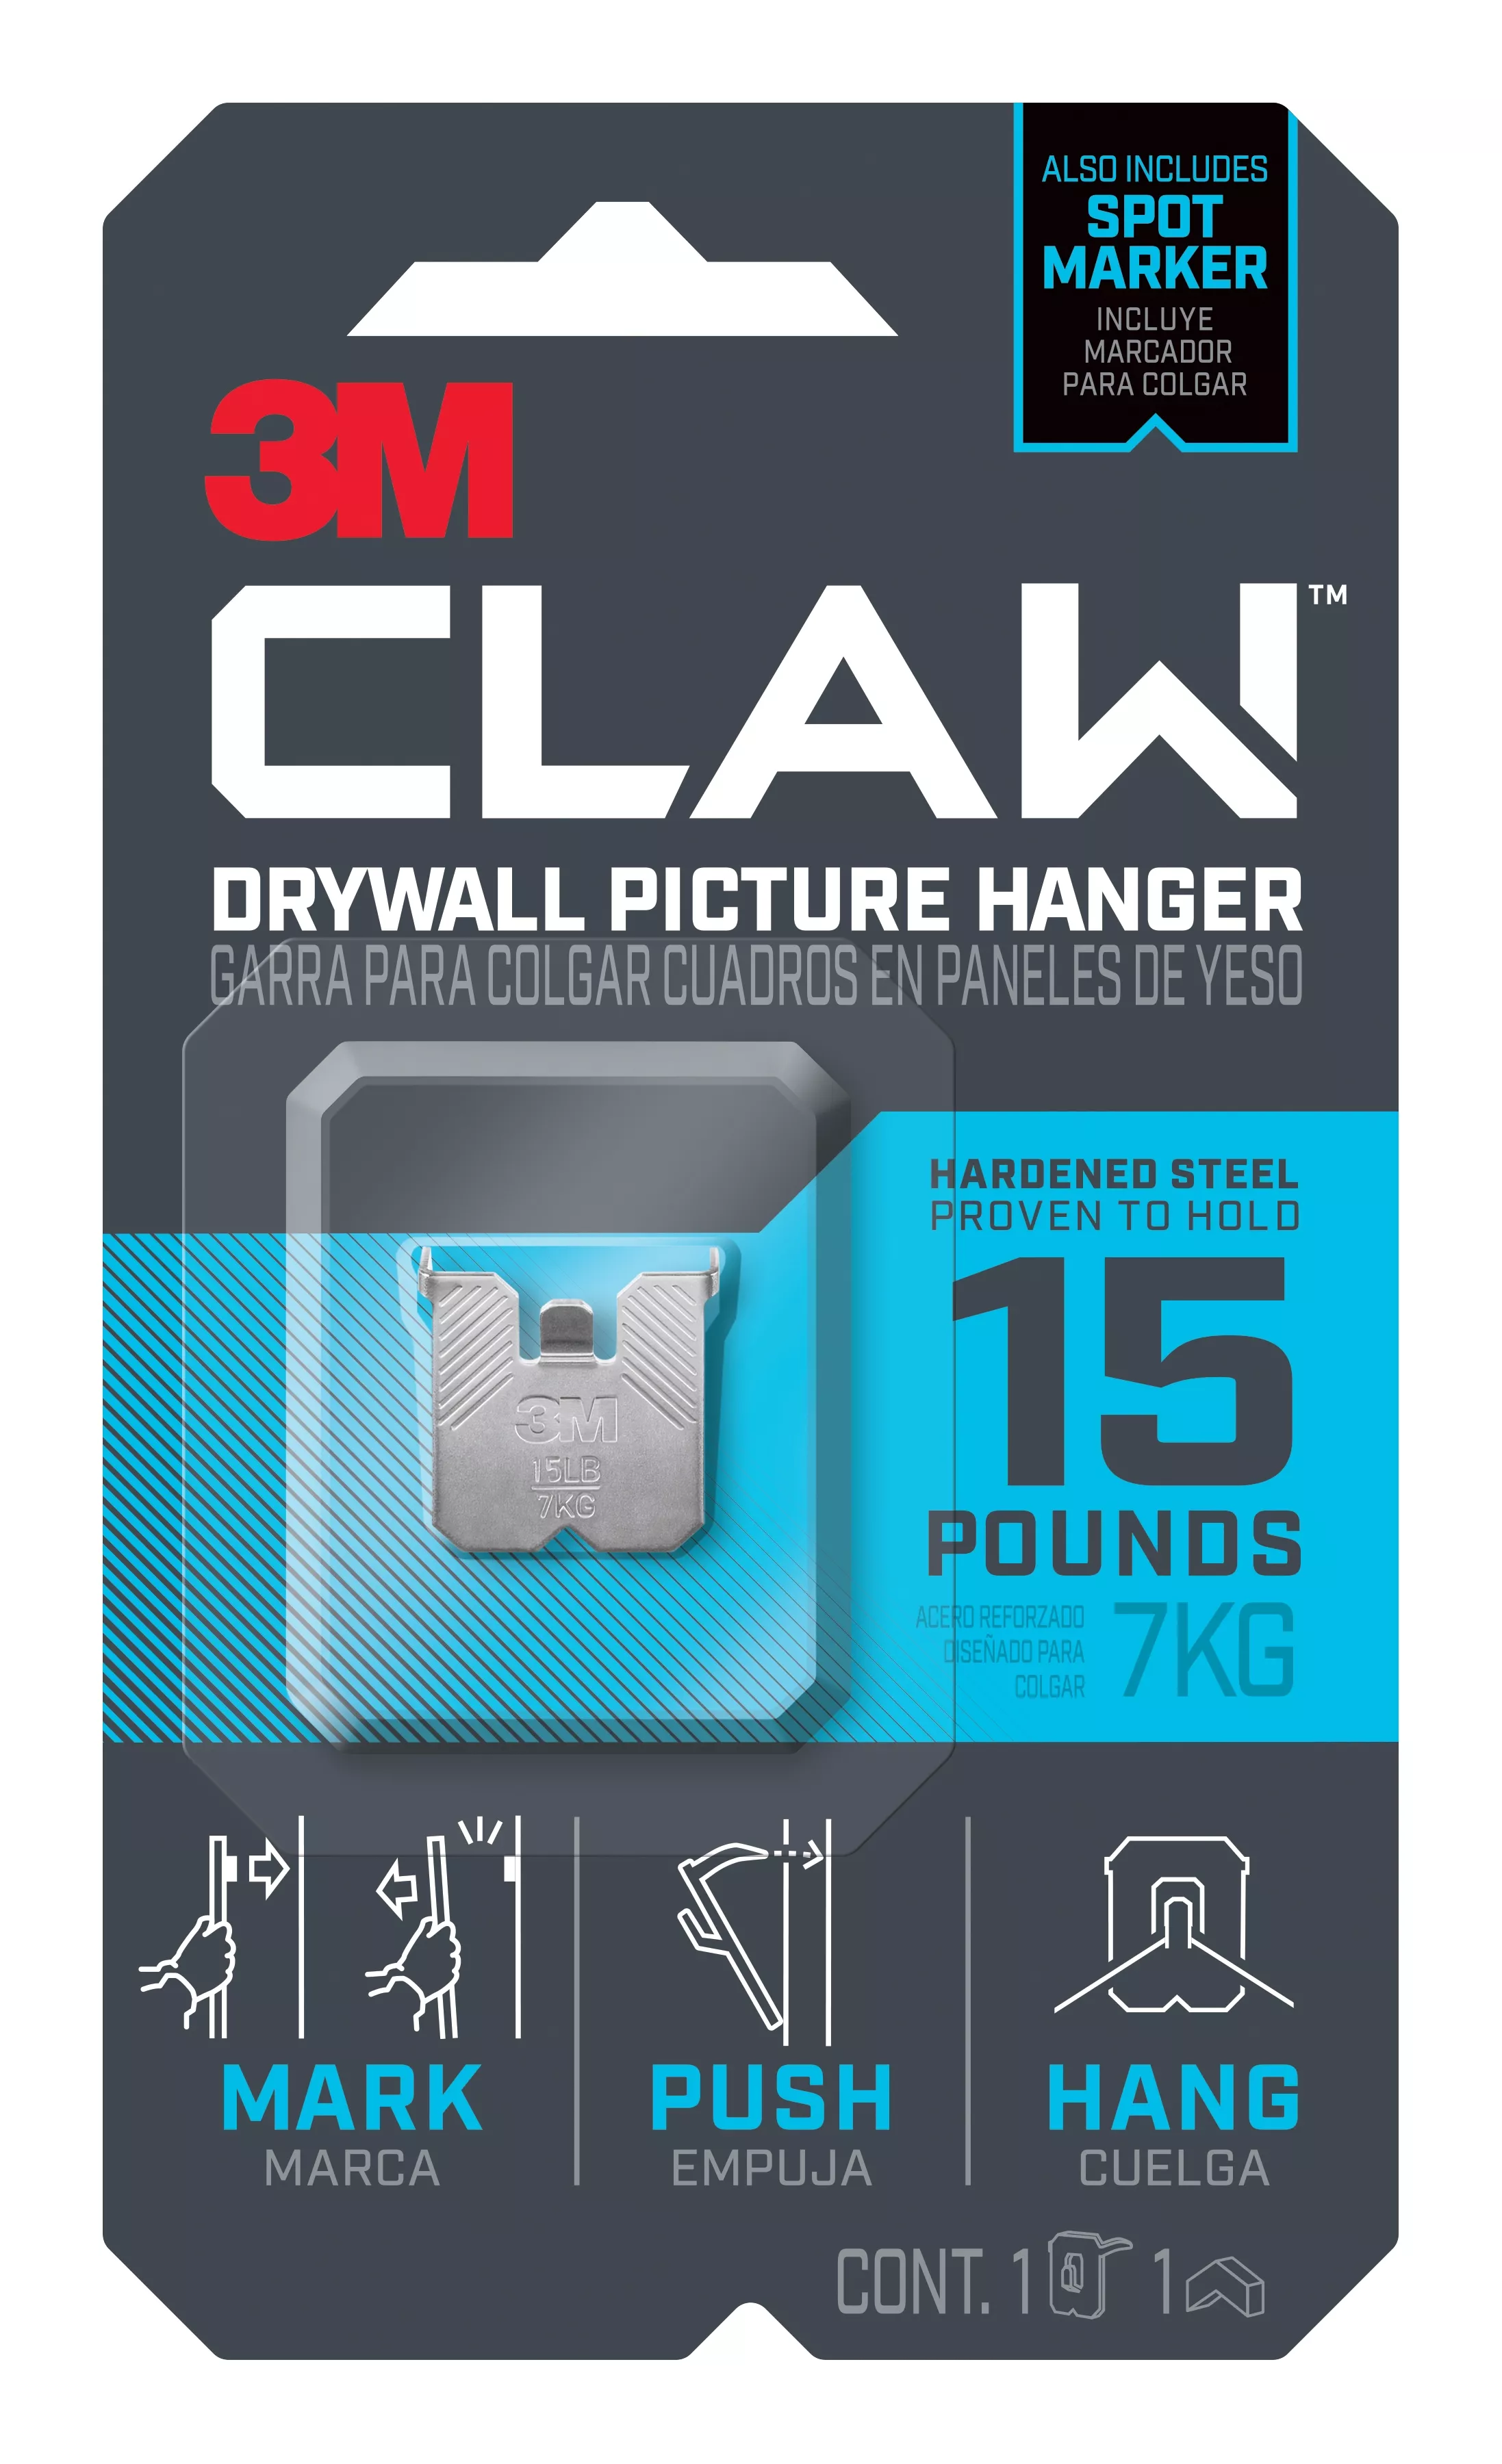 3M CLAW™ Drywall Picture Hanger 15 lb with Temporary Spot Marker 3PH15M-1EF, 1 hanger, 1 marker